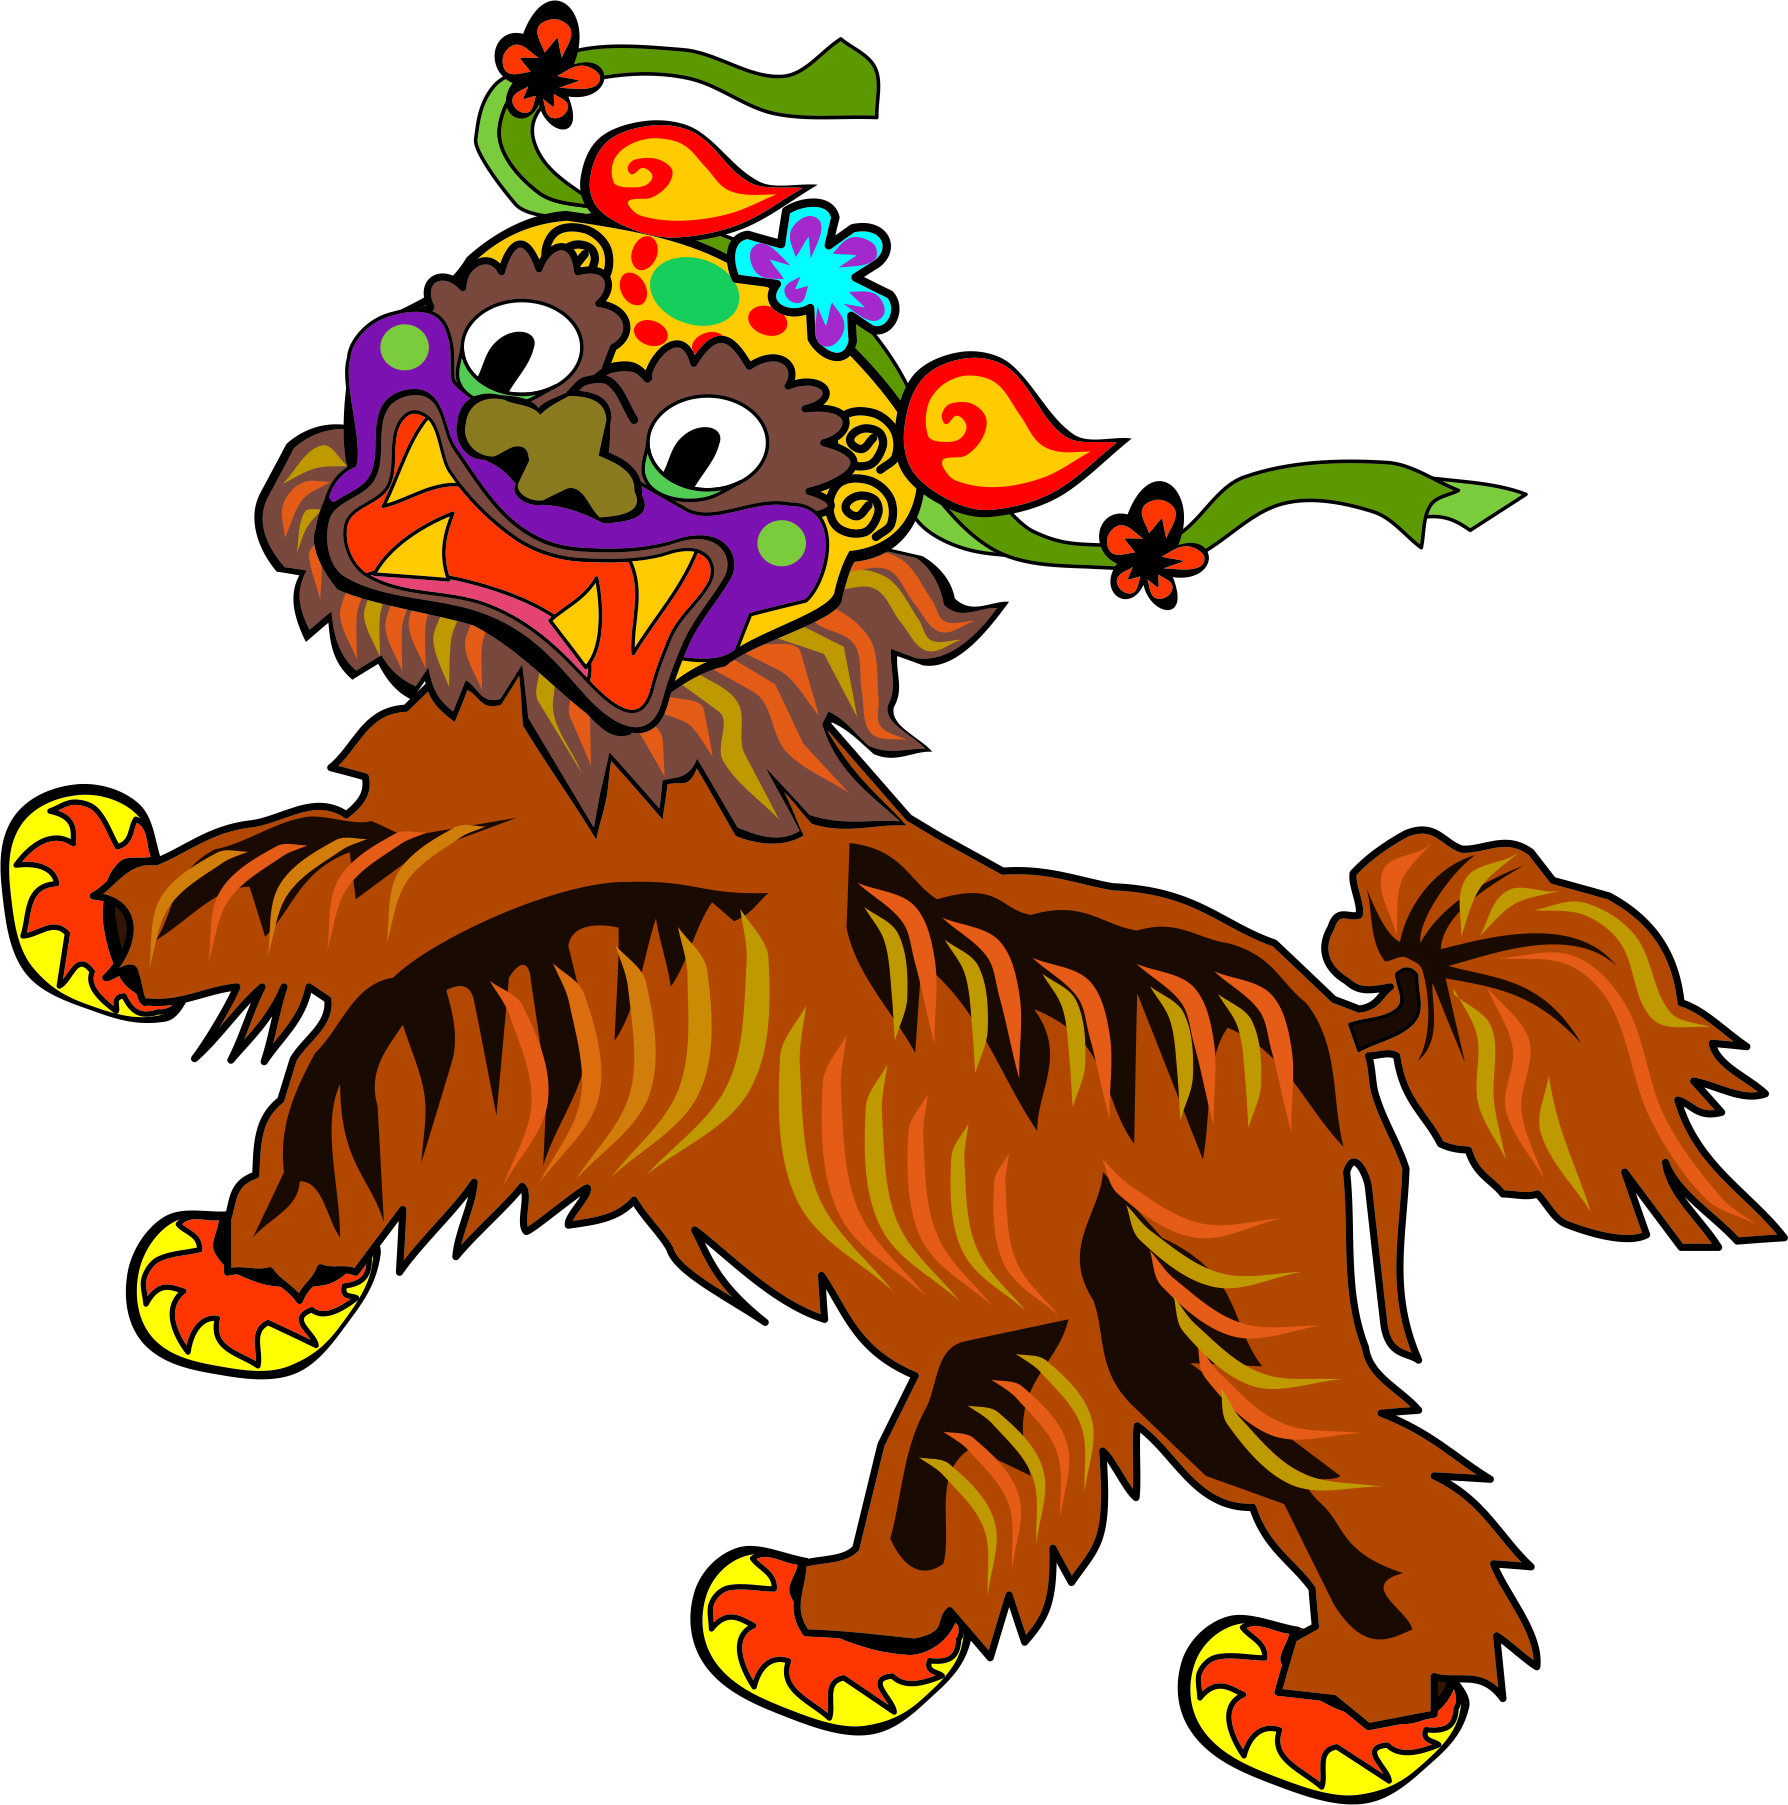 Chinese Dragon Images - ClipArt Best